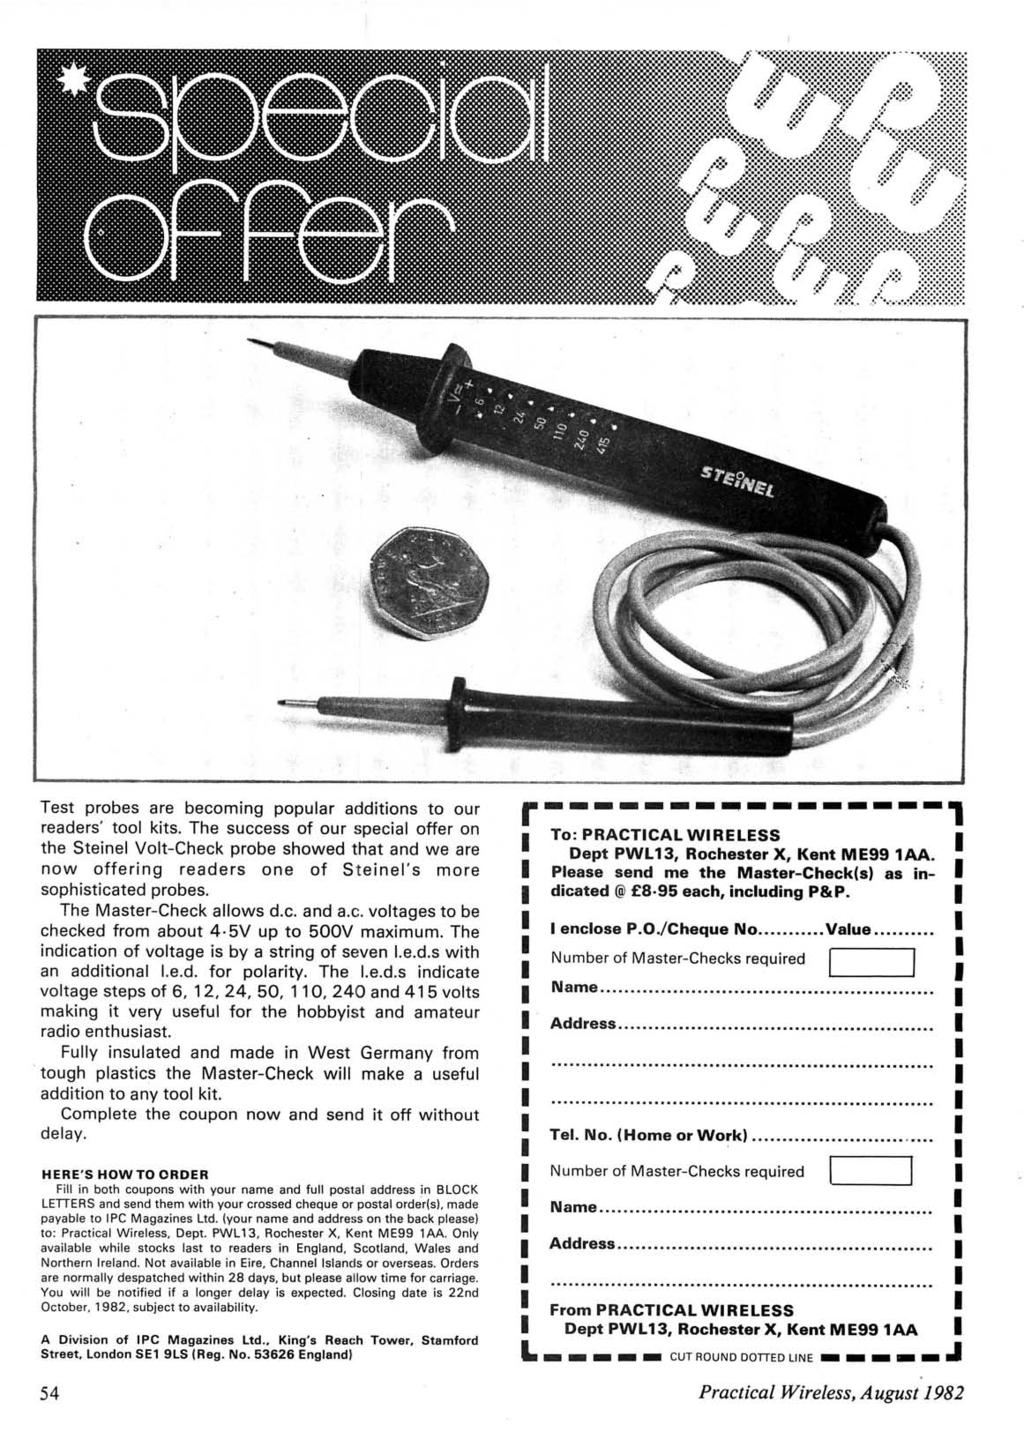 www.americanradiohistory.com Test probes are becoming popular additions to our readers' tool kits.